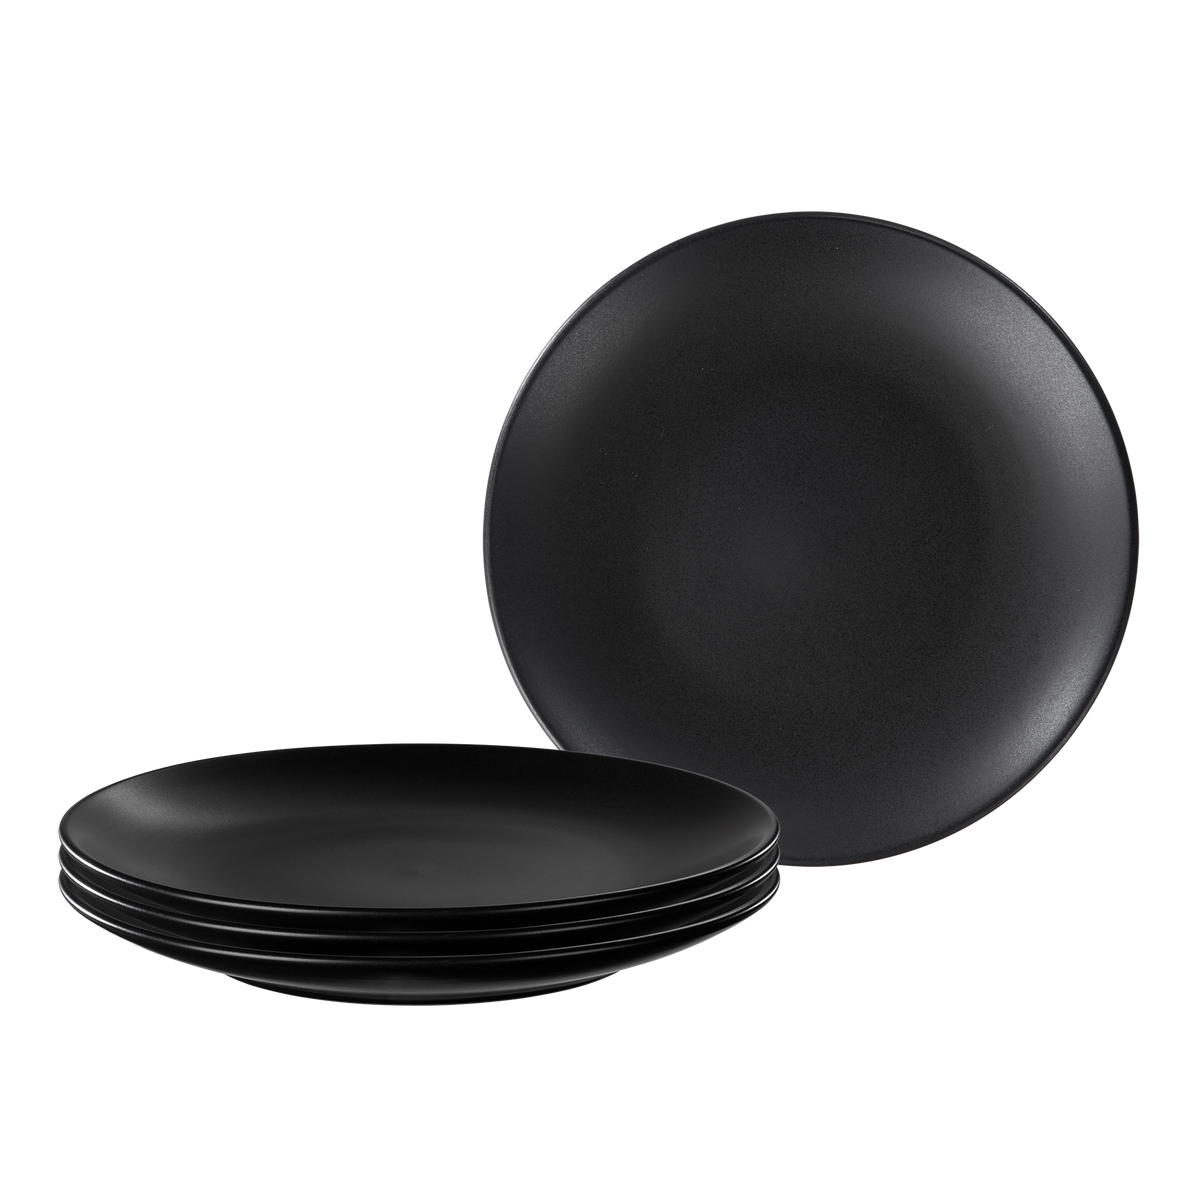 Product photo, three stacked black stoneware salad plates and one upright salad plate showing the size and rim curvature of the plates.